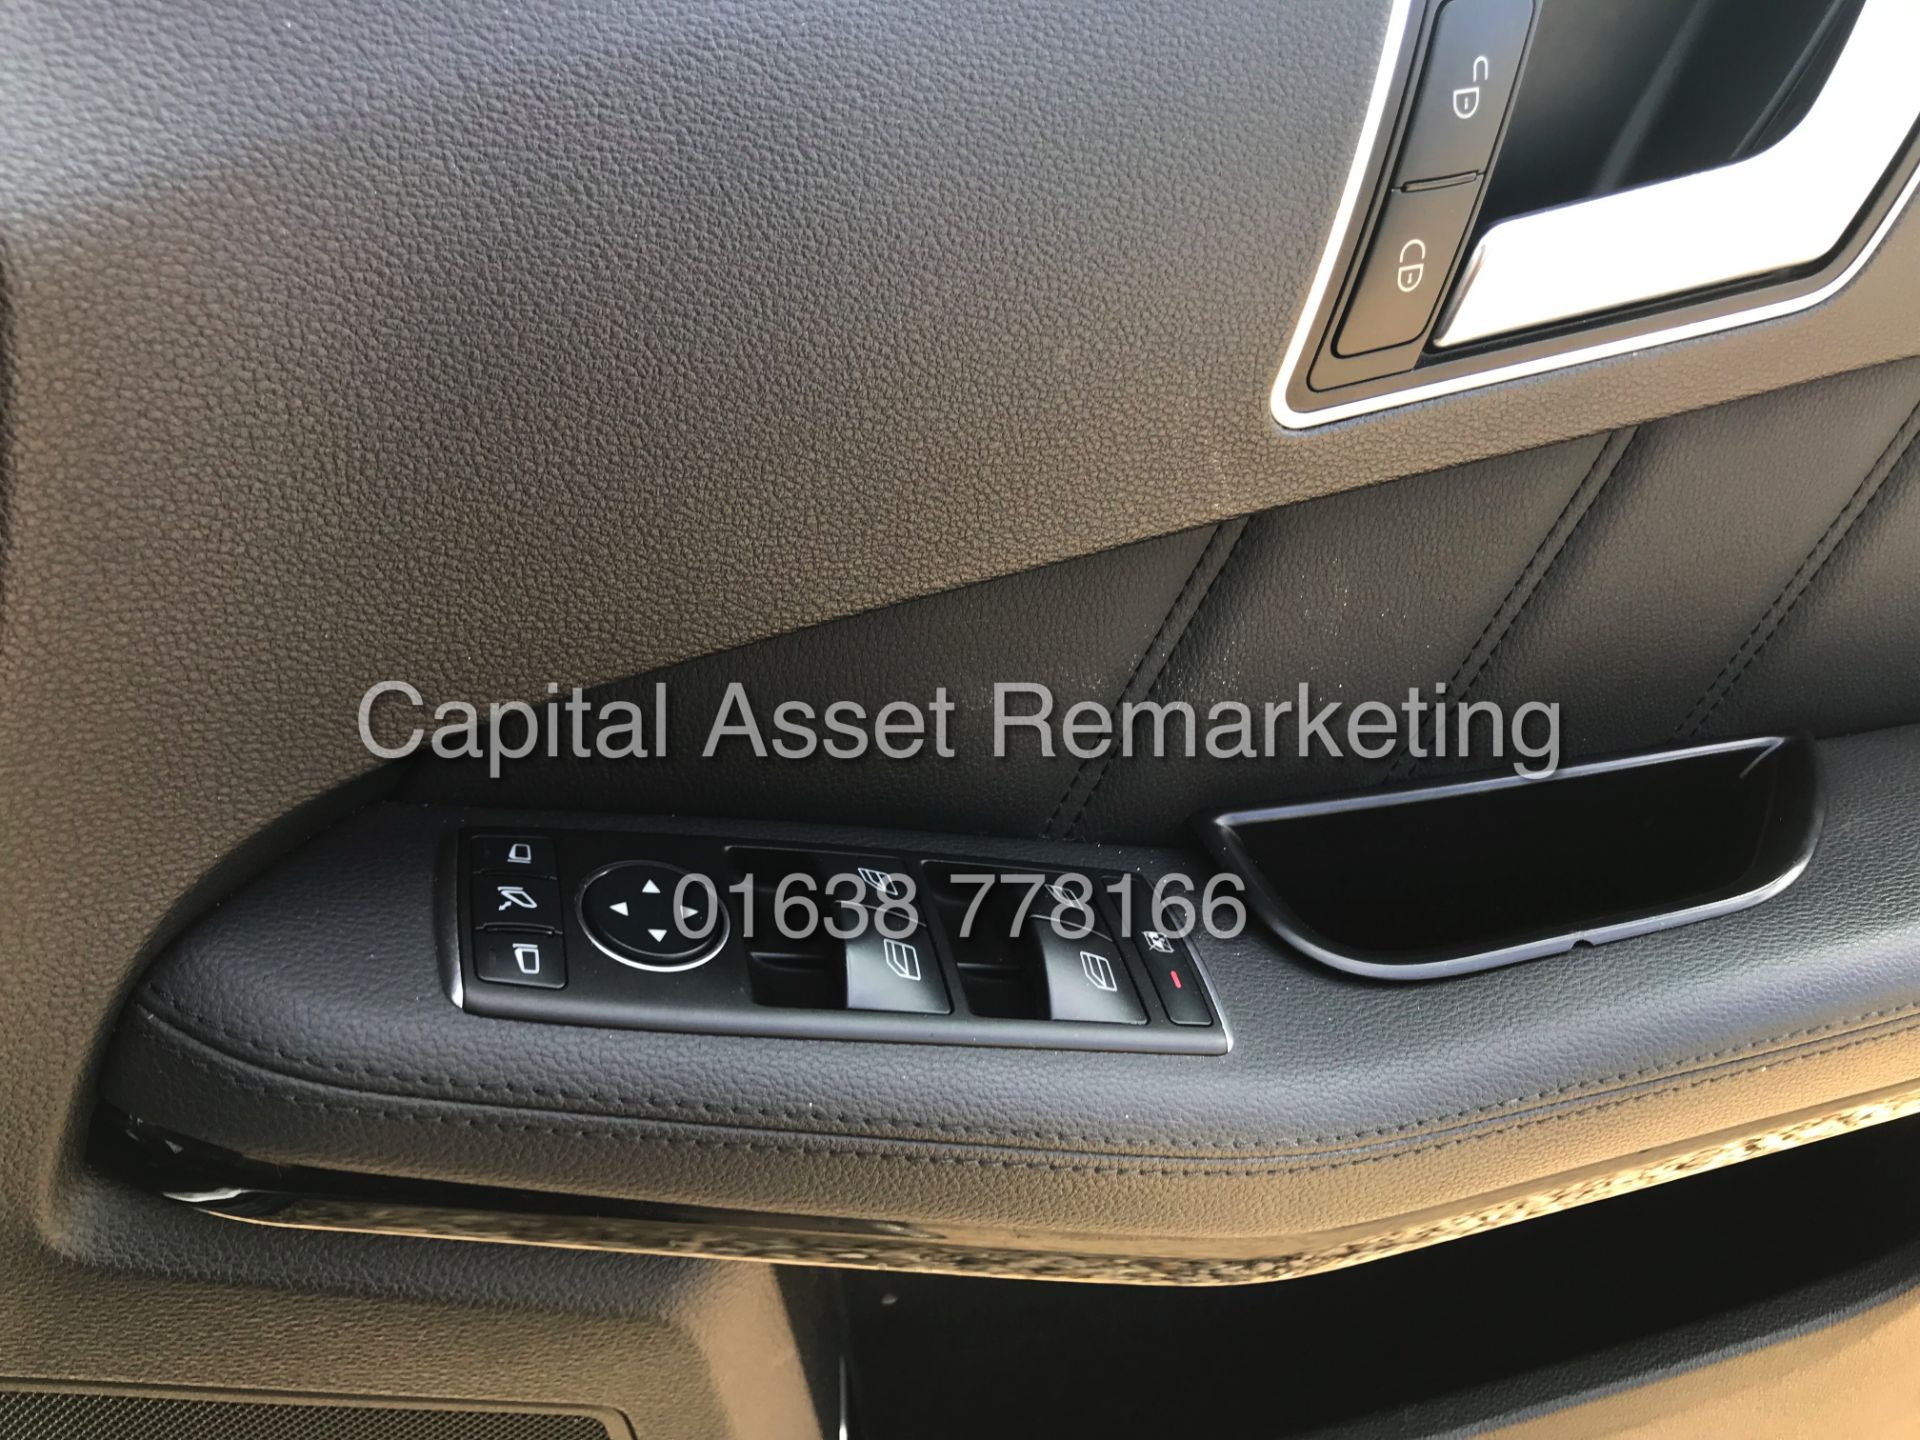 MERCEDES E220d 7G AUTO "EXECUTIVE - SPECIAL EQUIPMENT" SAT NAV - LEATHER - CLIMATE - CRUISE - Image 17 of 20